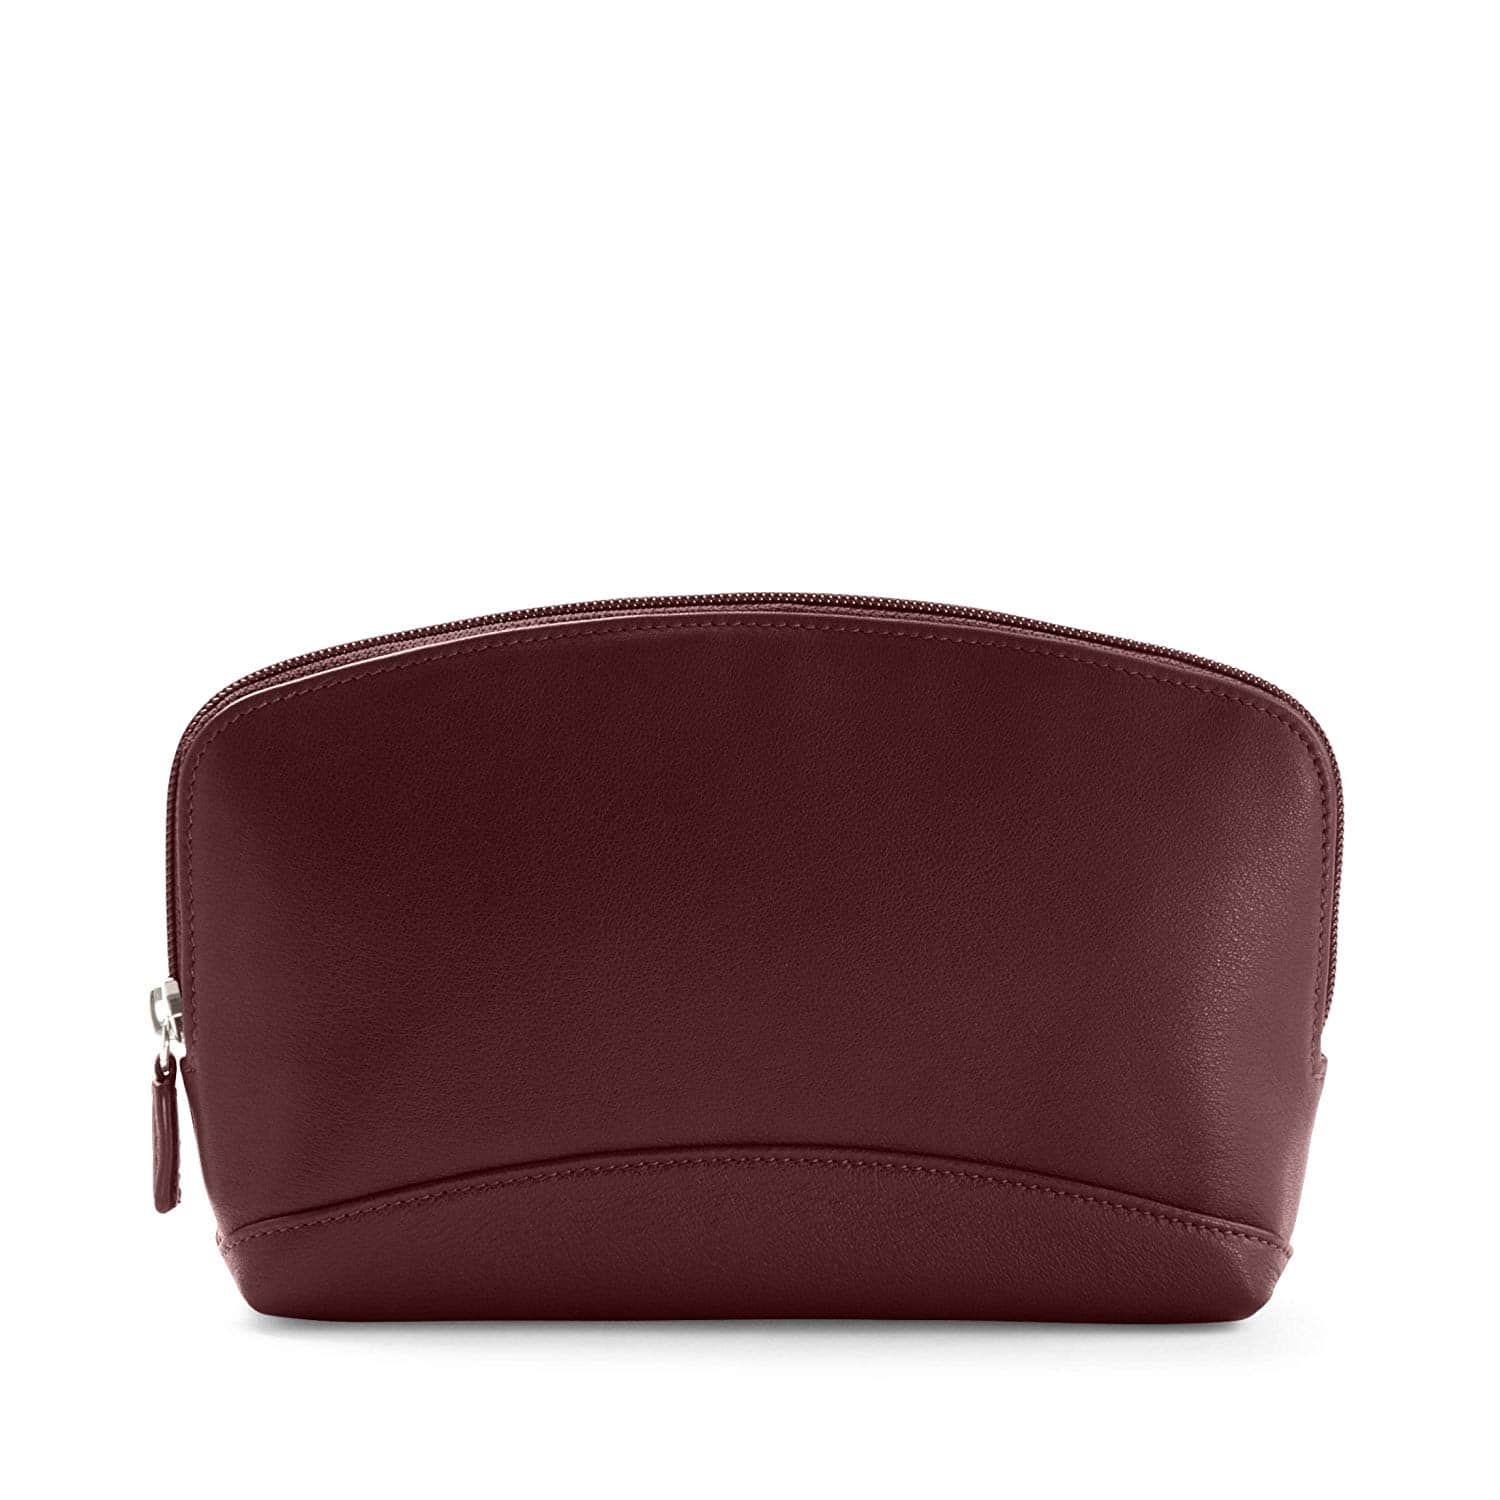 leather-anniversary-gifts-for-her-cosmetic-bag